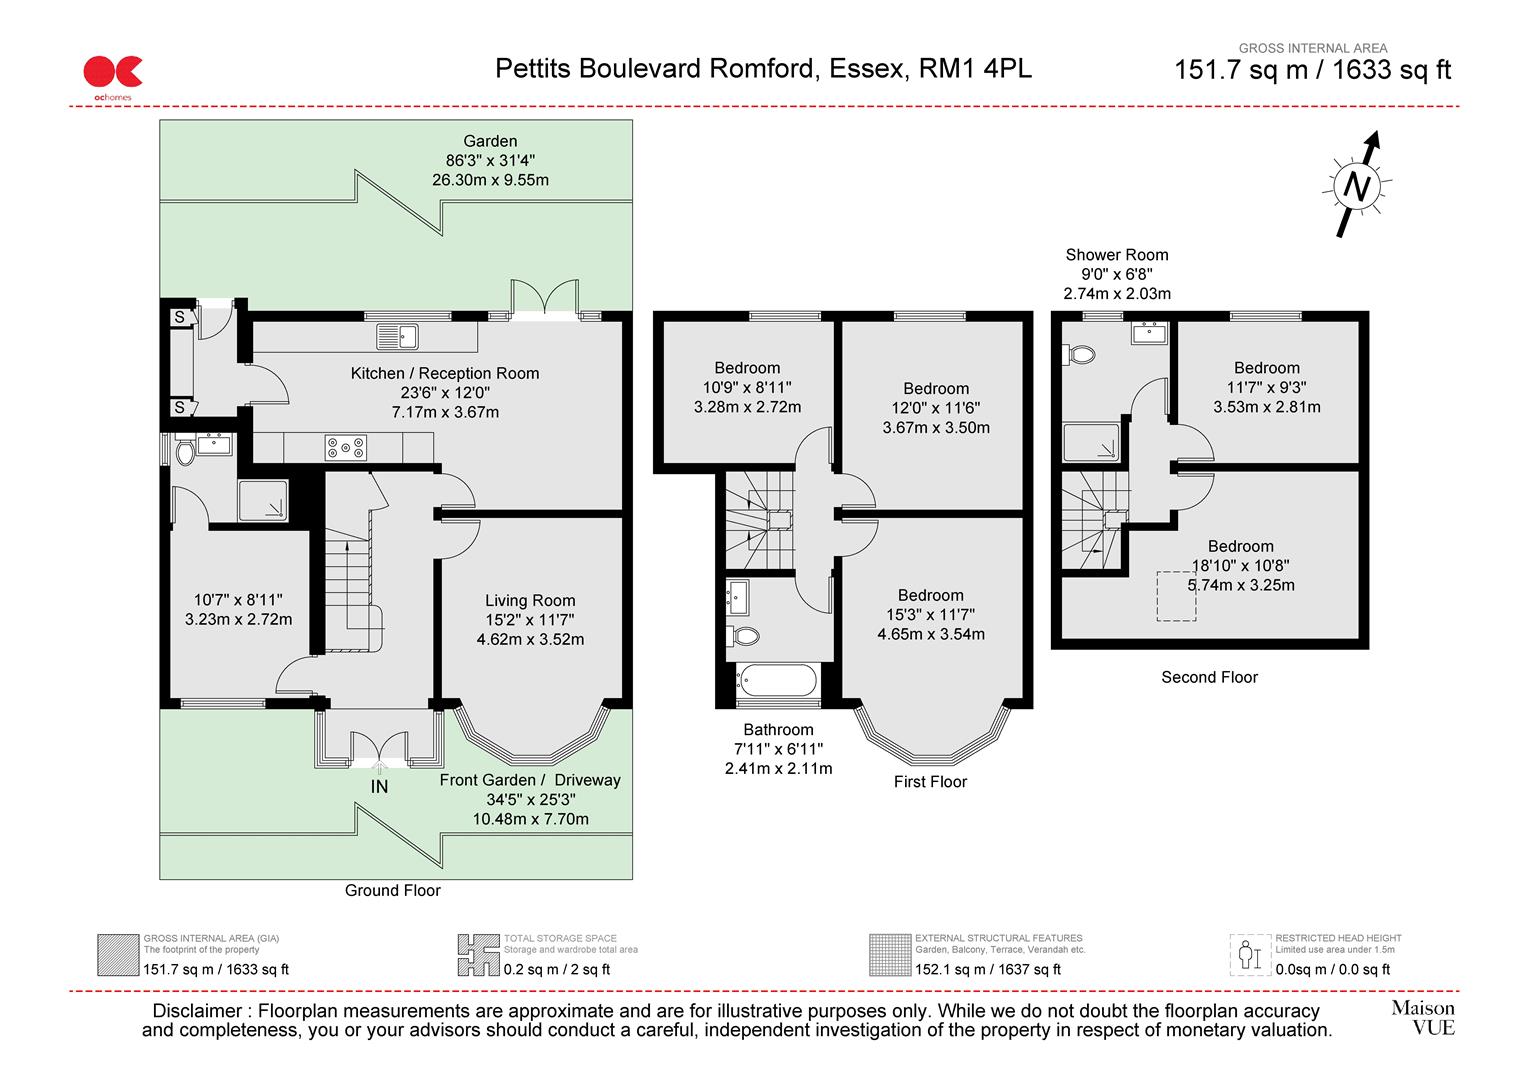 5 bed semi-detached house for sale in Pettits Boulevard, Romford - Property floorplan